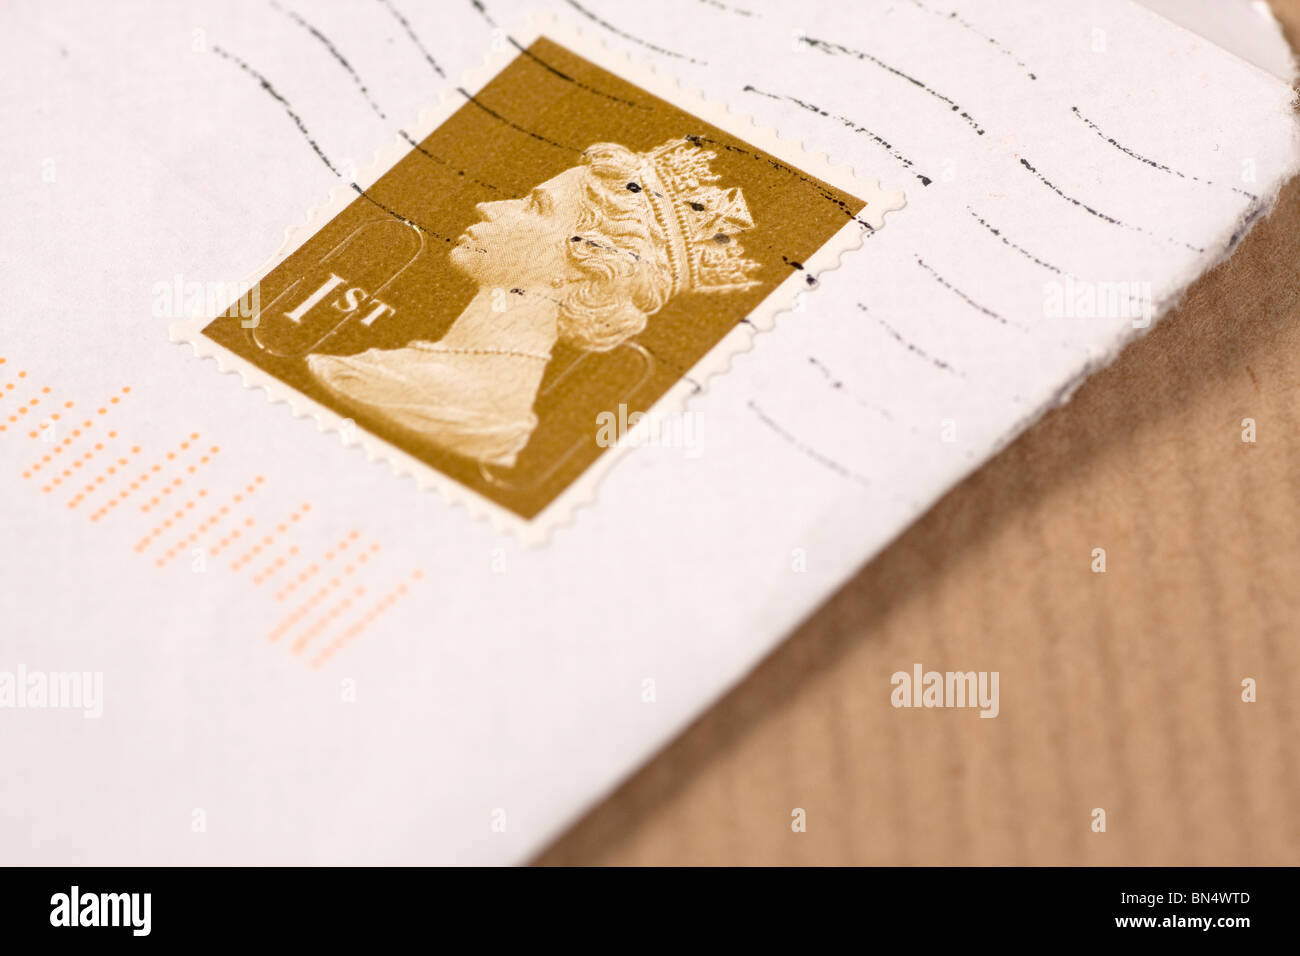 Close up of an envelope with 1st class UK postage stamp on brown paper Stock Photo